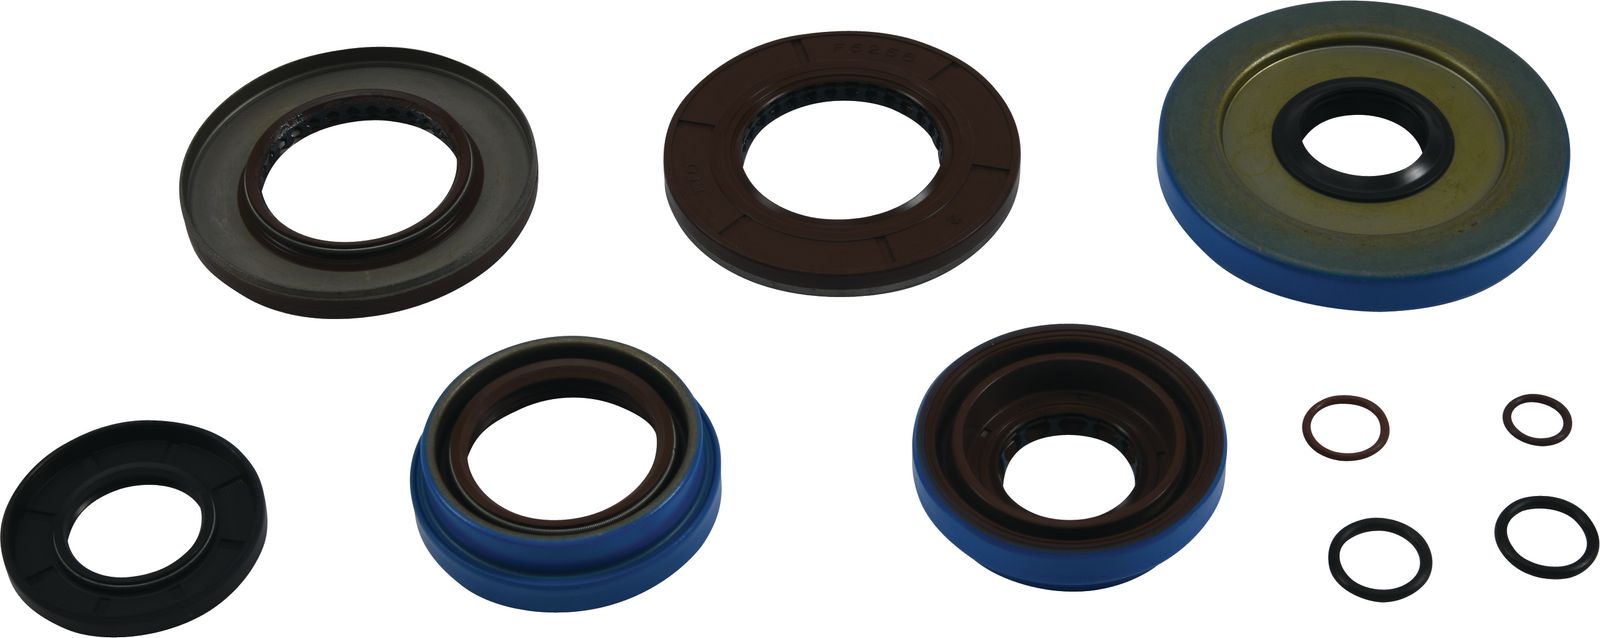 Wrp Diff Seal Kits - WRP252085-5 image